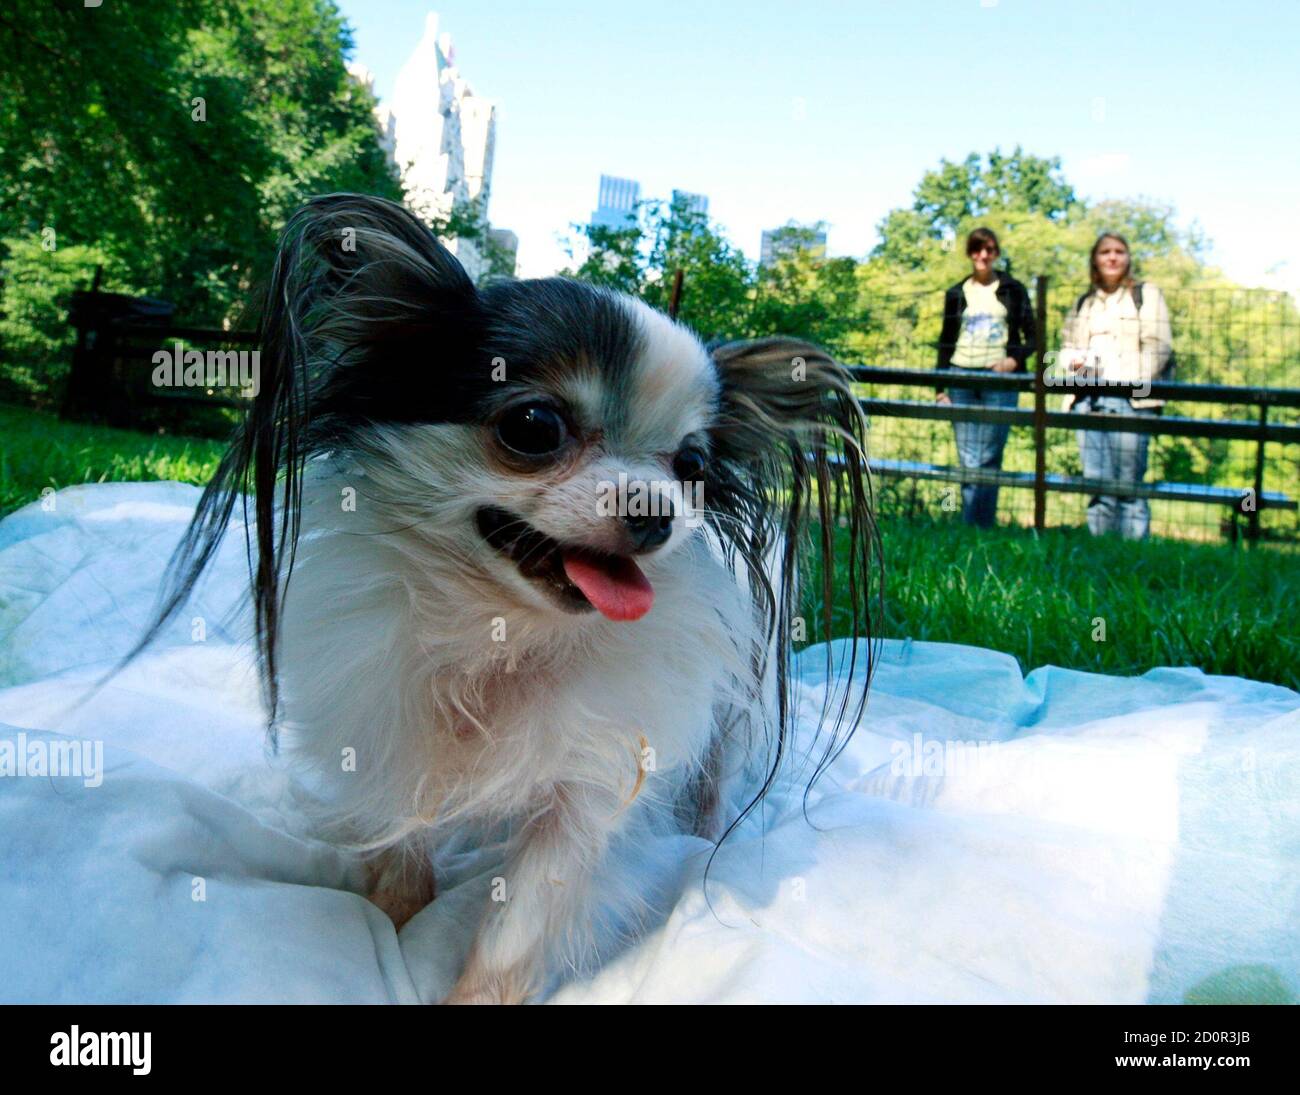 Guinness World Record's Smallest Living Dog, Boo Boo, poses during a photo  call in New York September 15, 2010. Boo Boo, a Chihuahua, measures 4  inches (10cm) tall,  inches () long